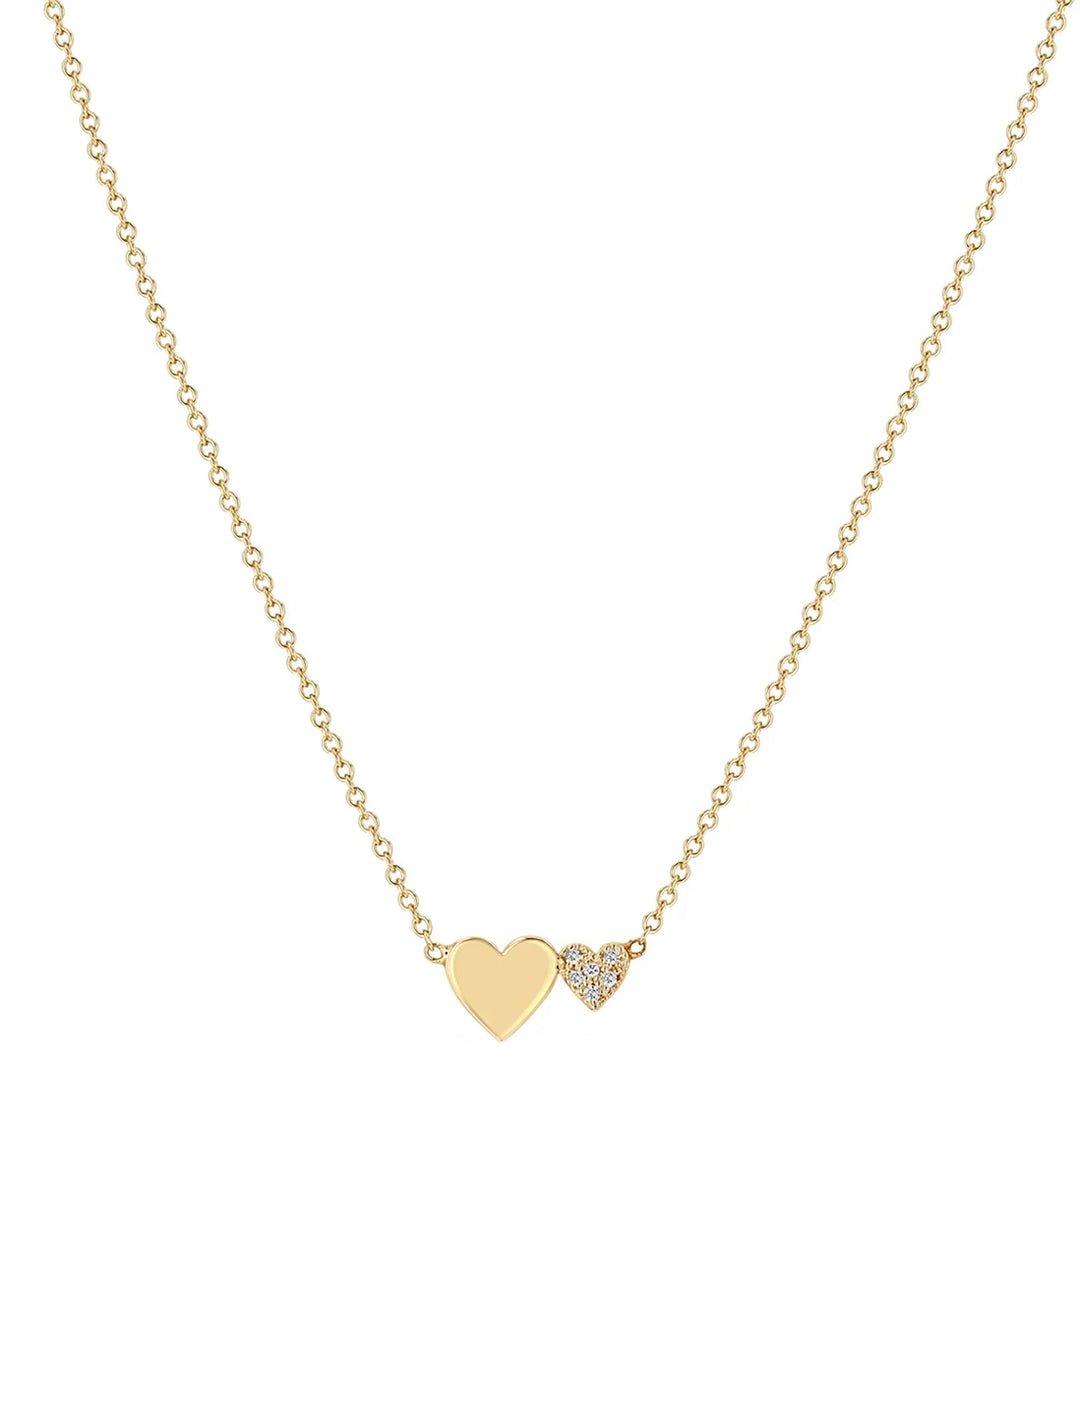 Front view of Zoe Chicco's 14k mixed midi & itty bitty pave diamond heart necklace | 16-17-18".